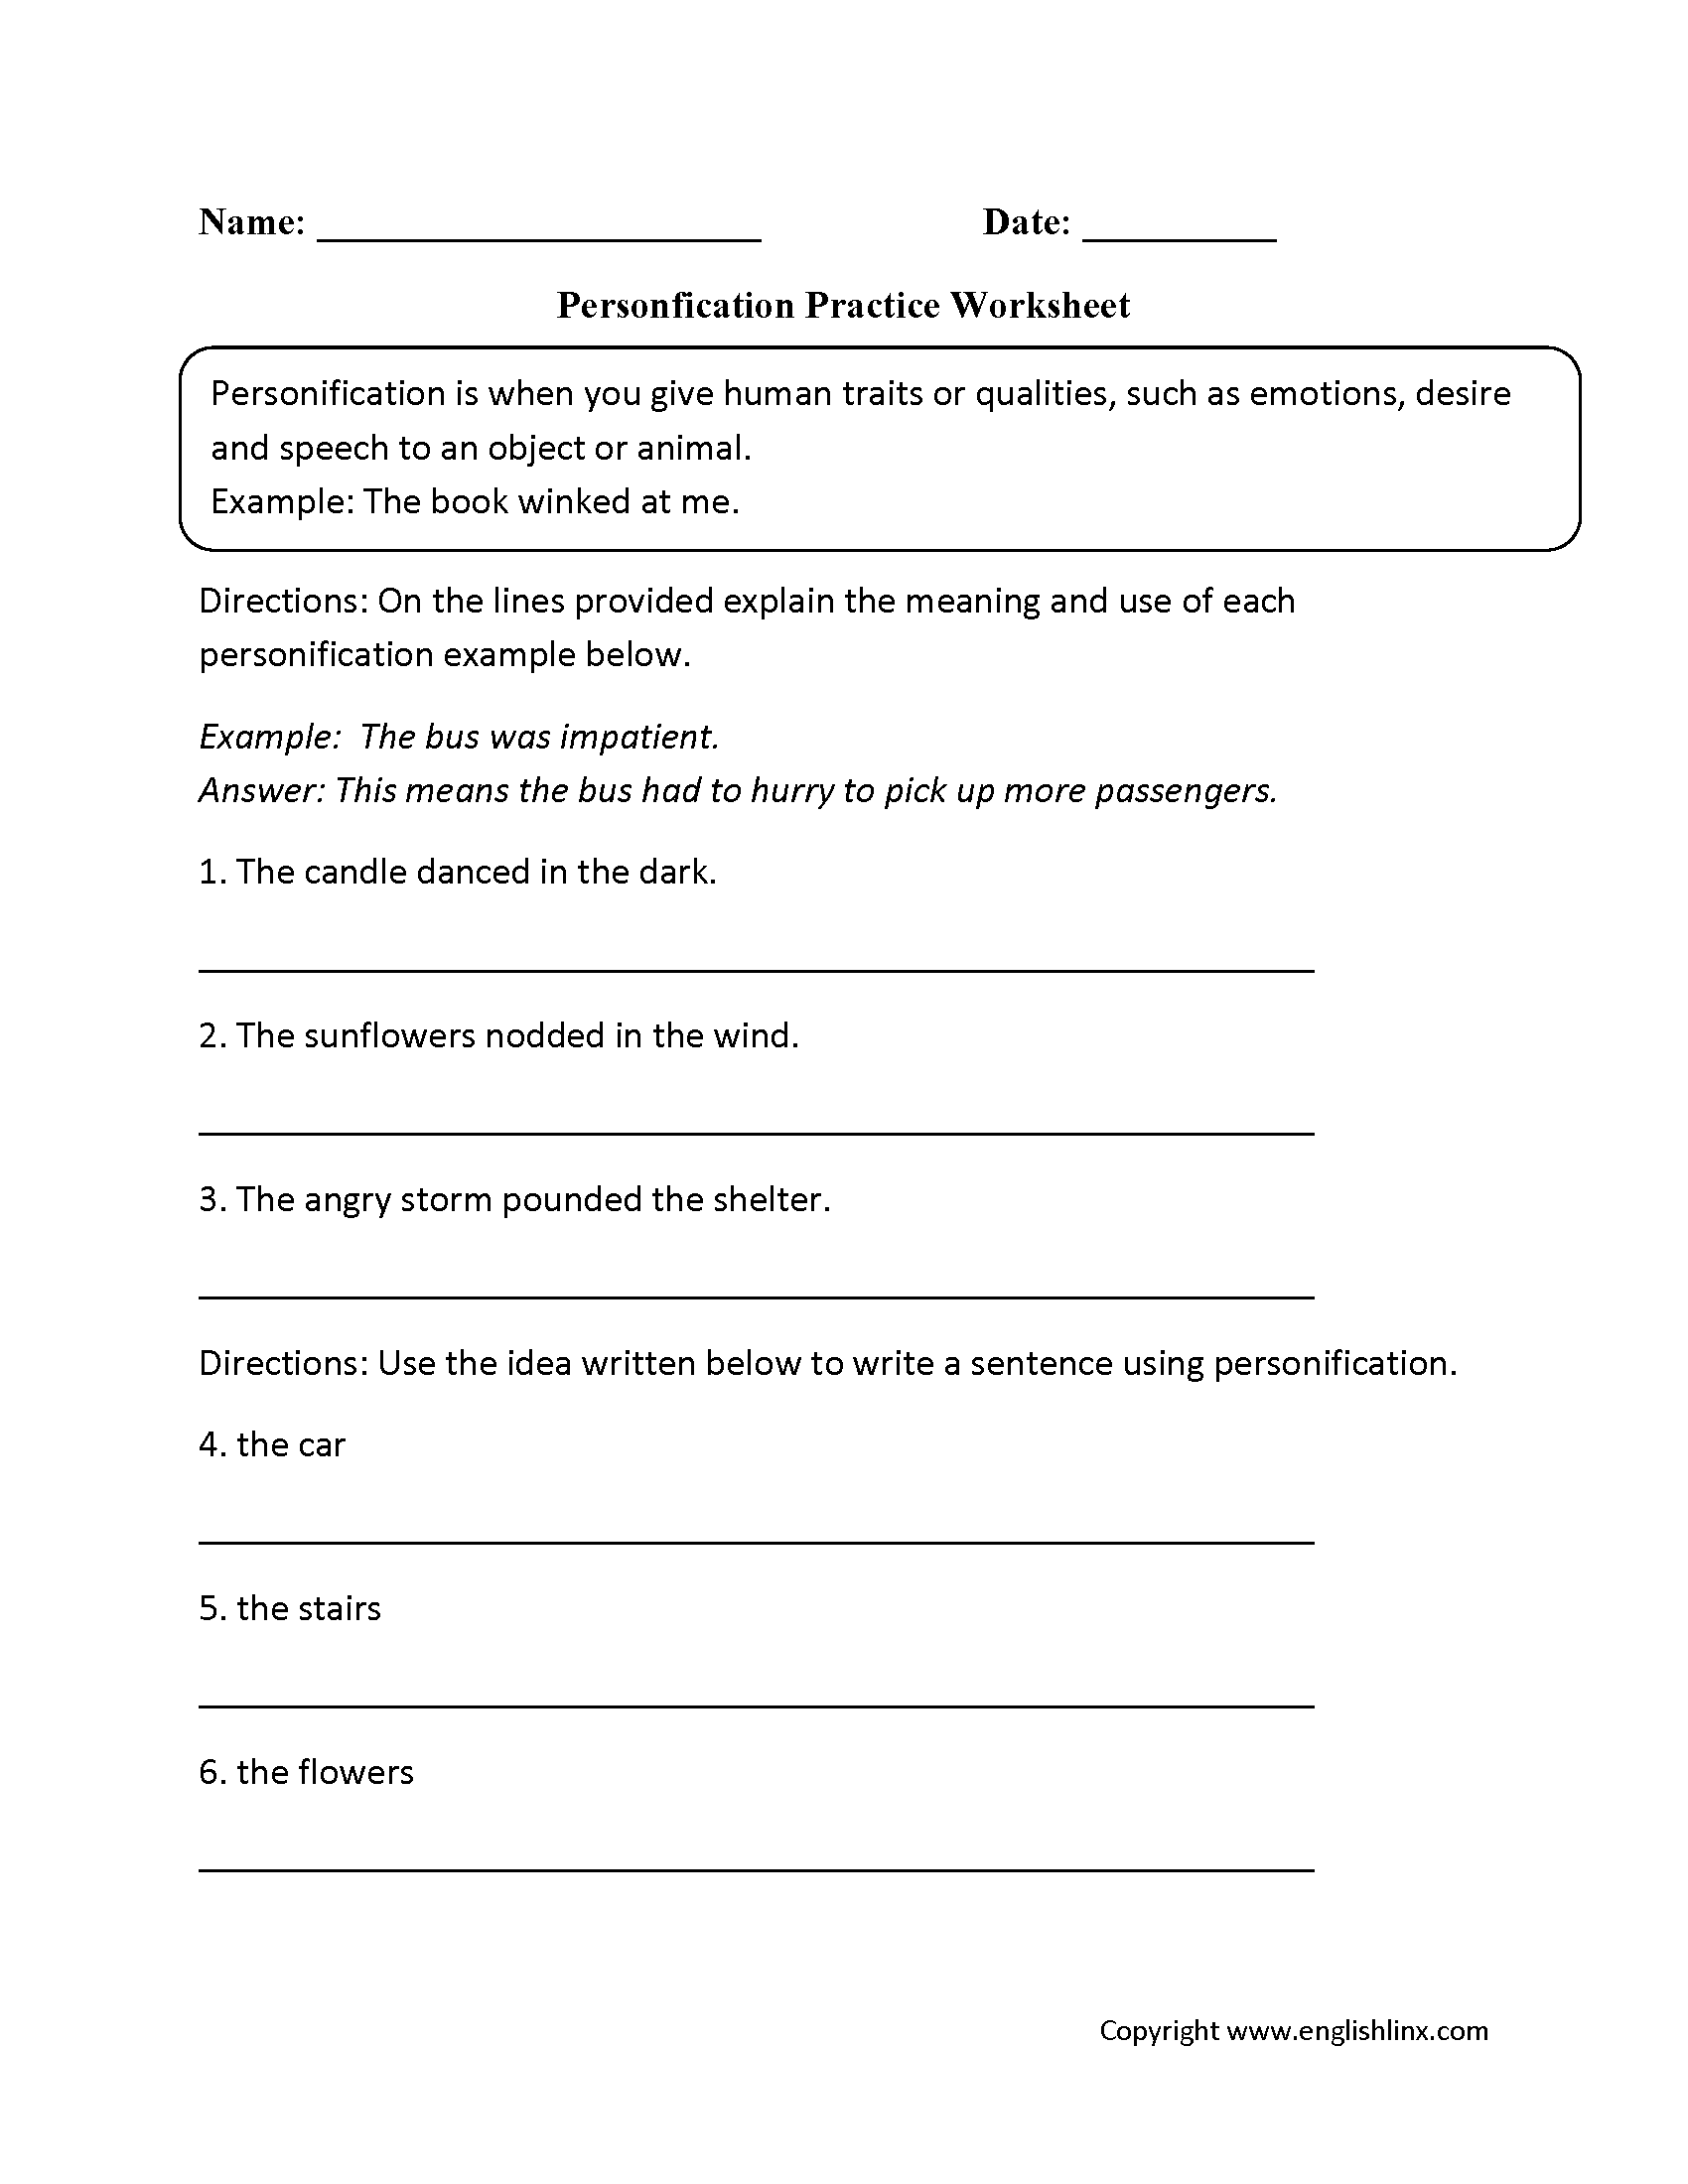 Personification Practice Worksheets